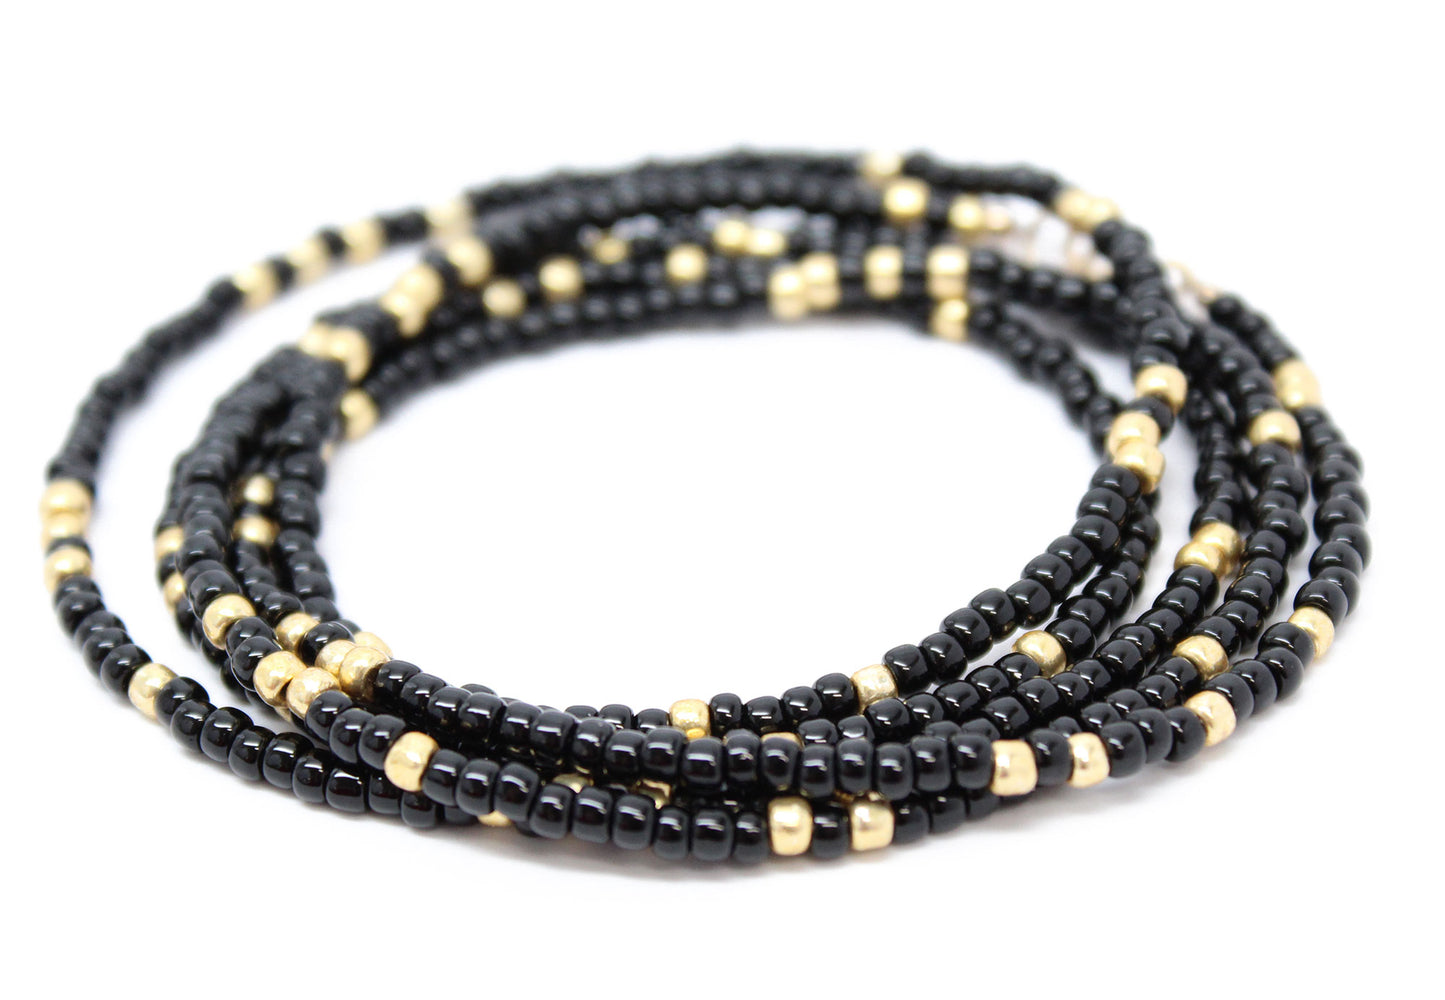 Black and Gold Seed Bead Necklace-Single Strand